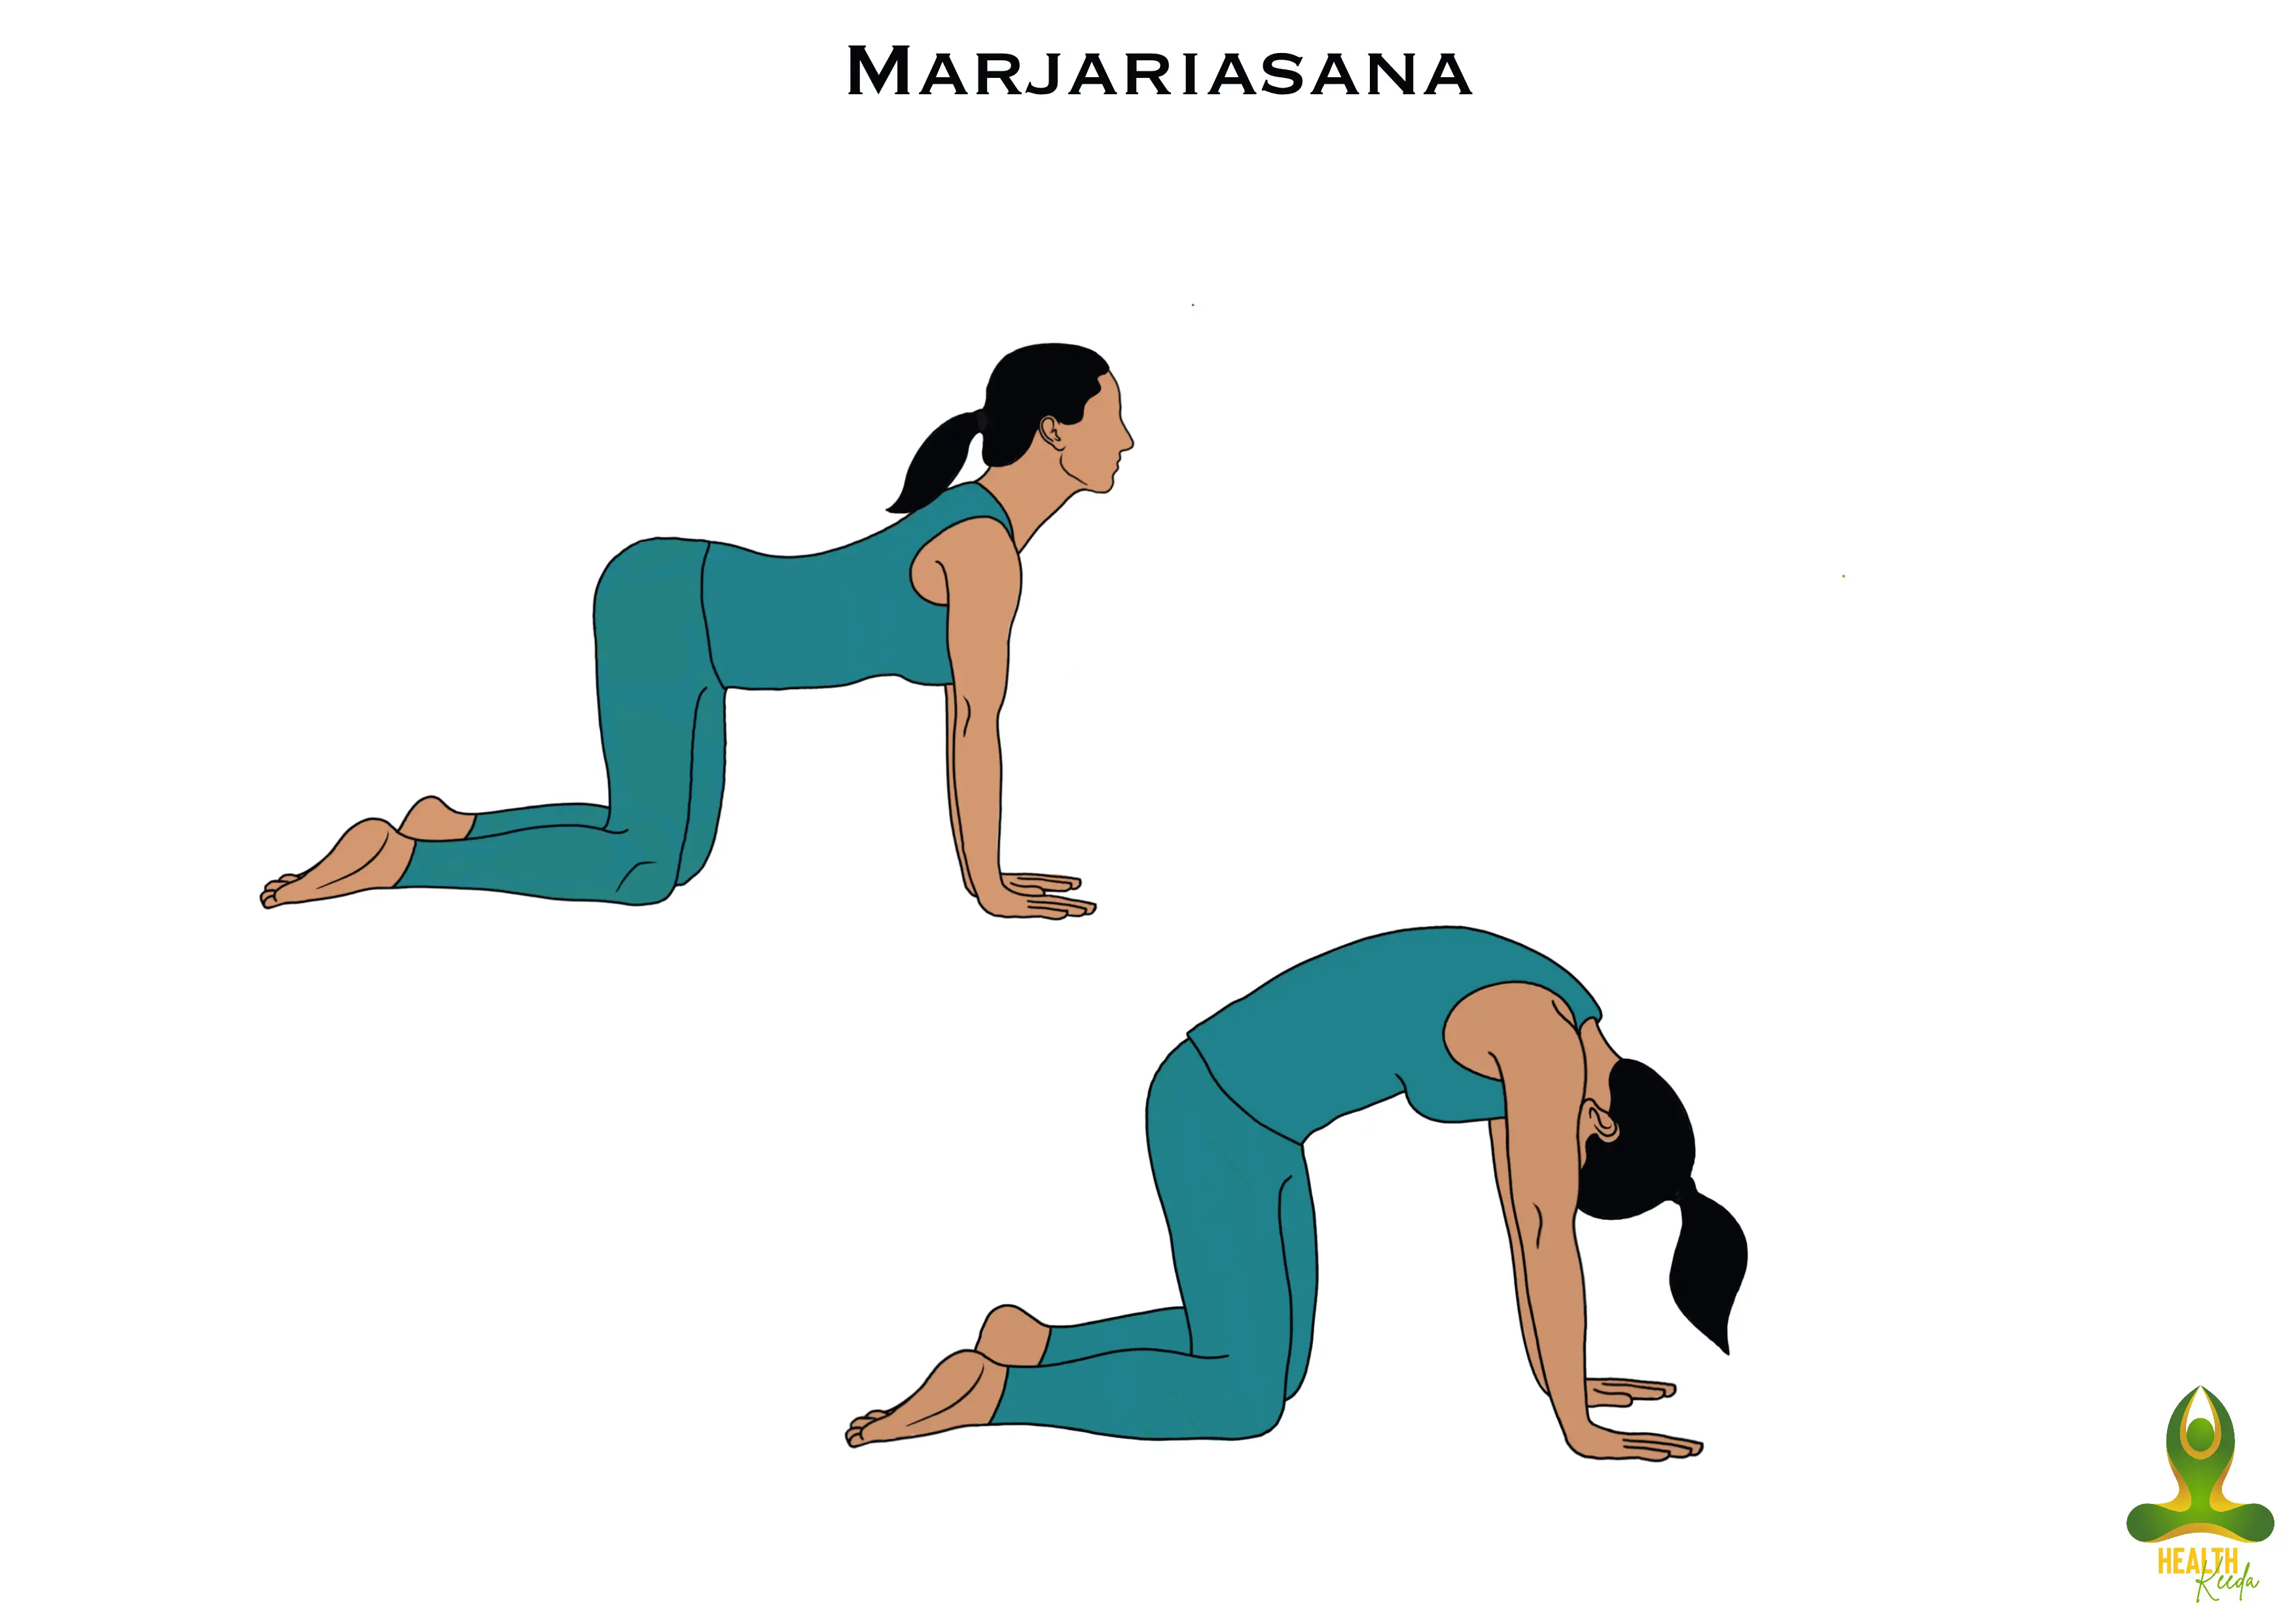 Marjariasana or Cat stretch - yoga for lower back pain